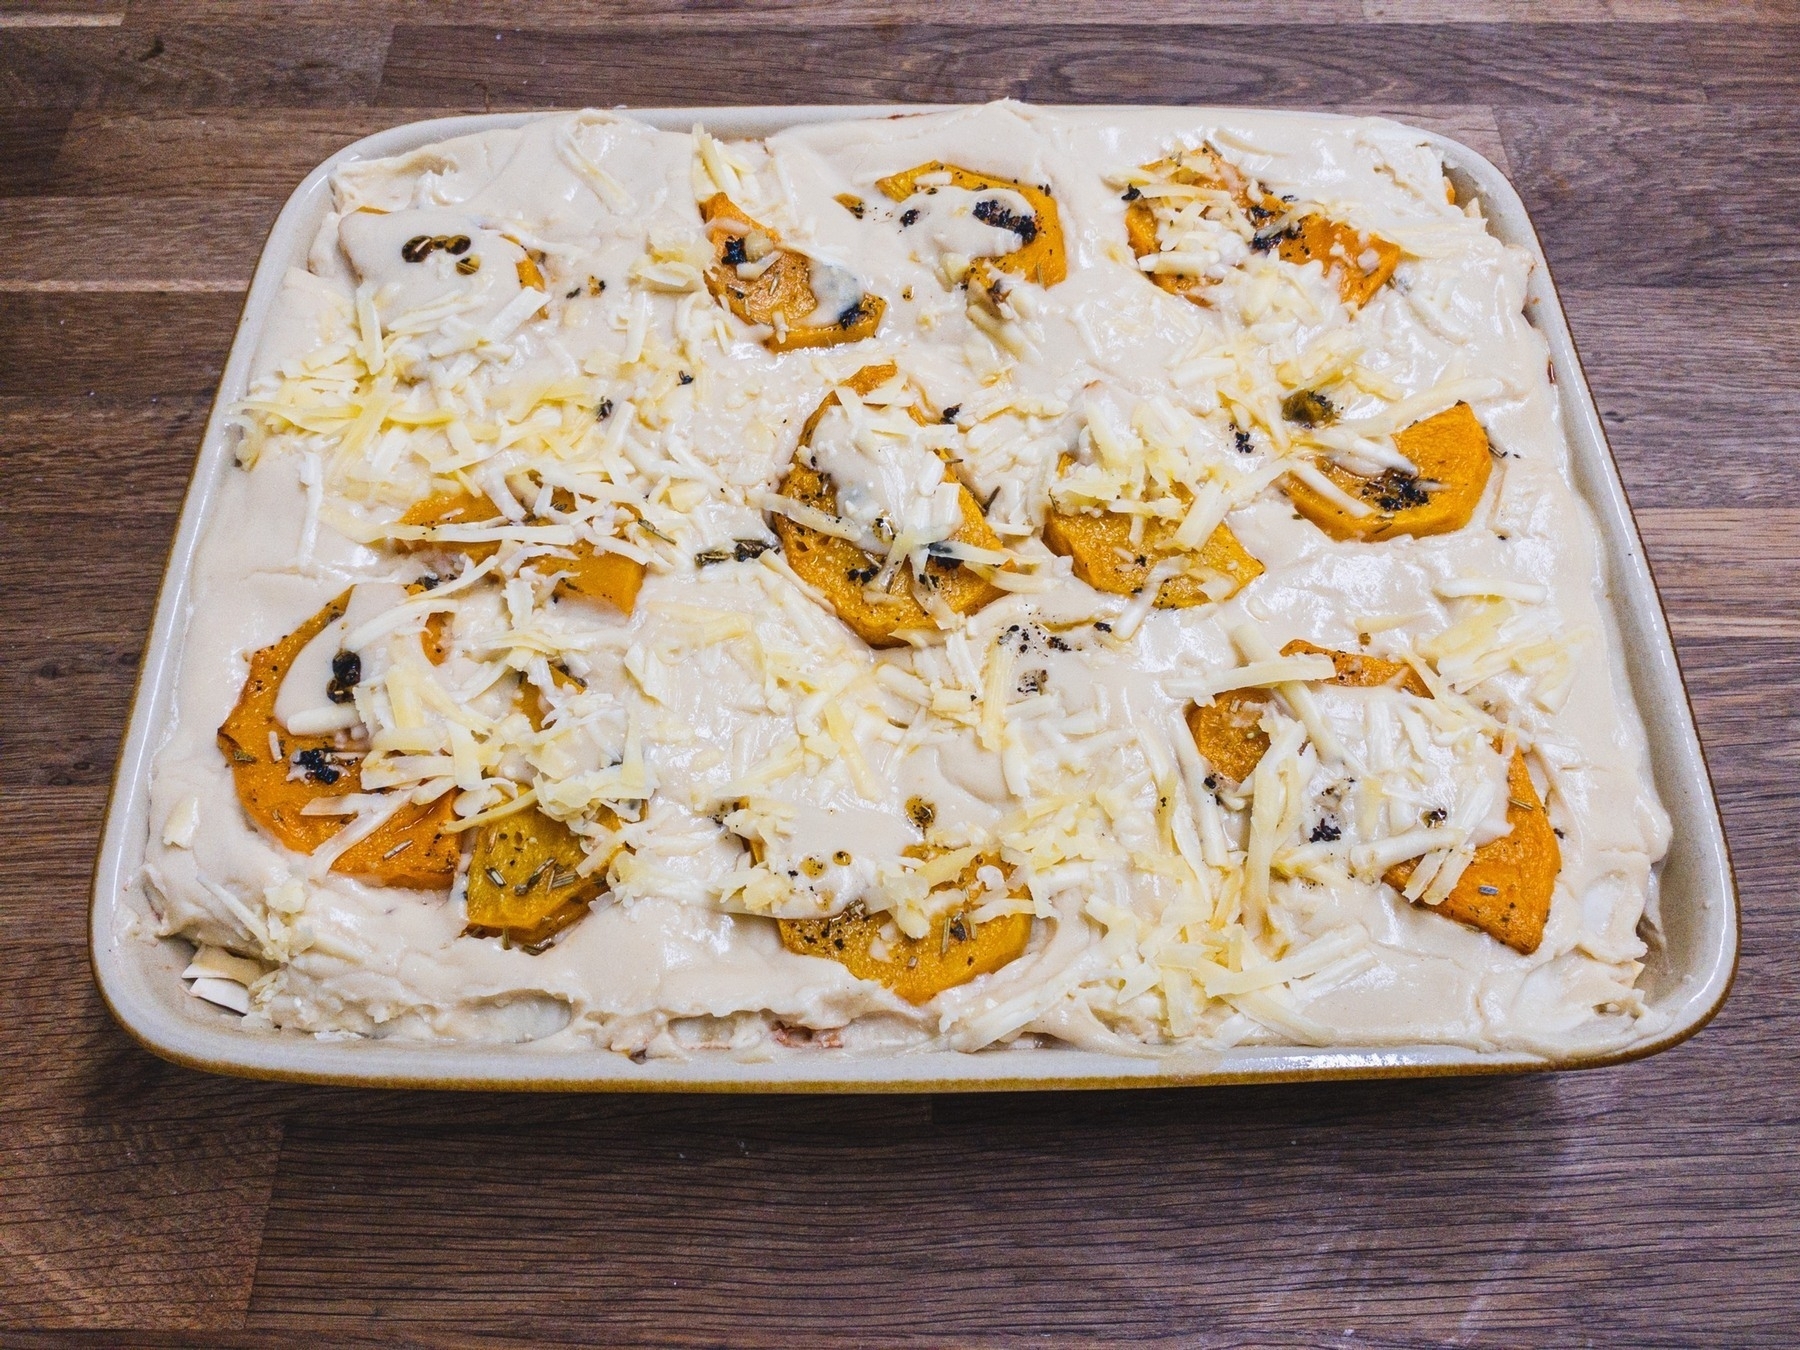 Large rectangular dish of uncooked lasagne topped with slices of butternut squash and grated cheese